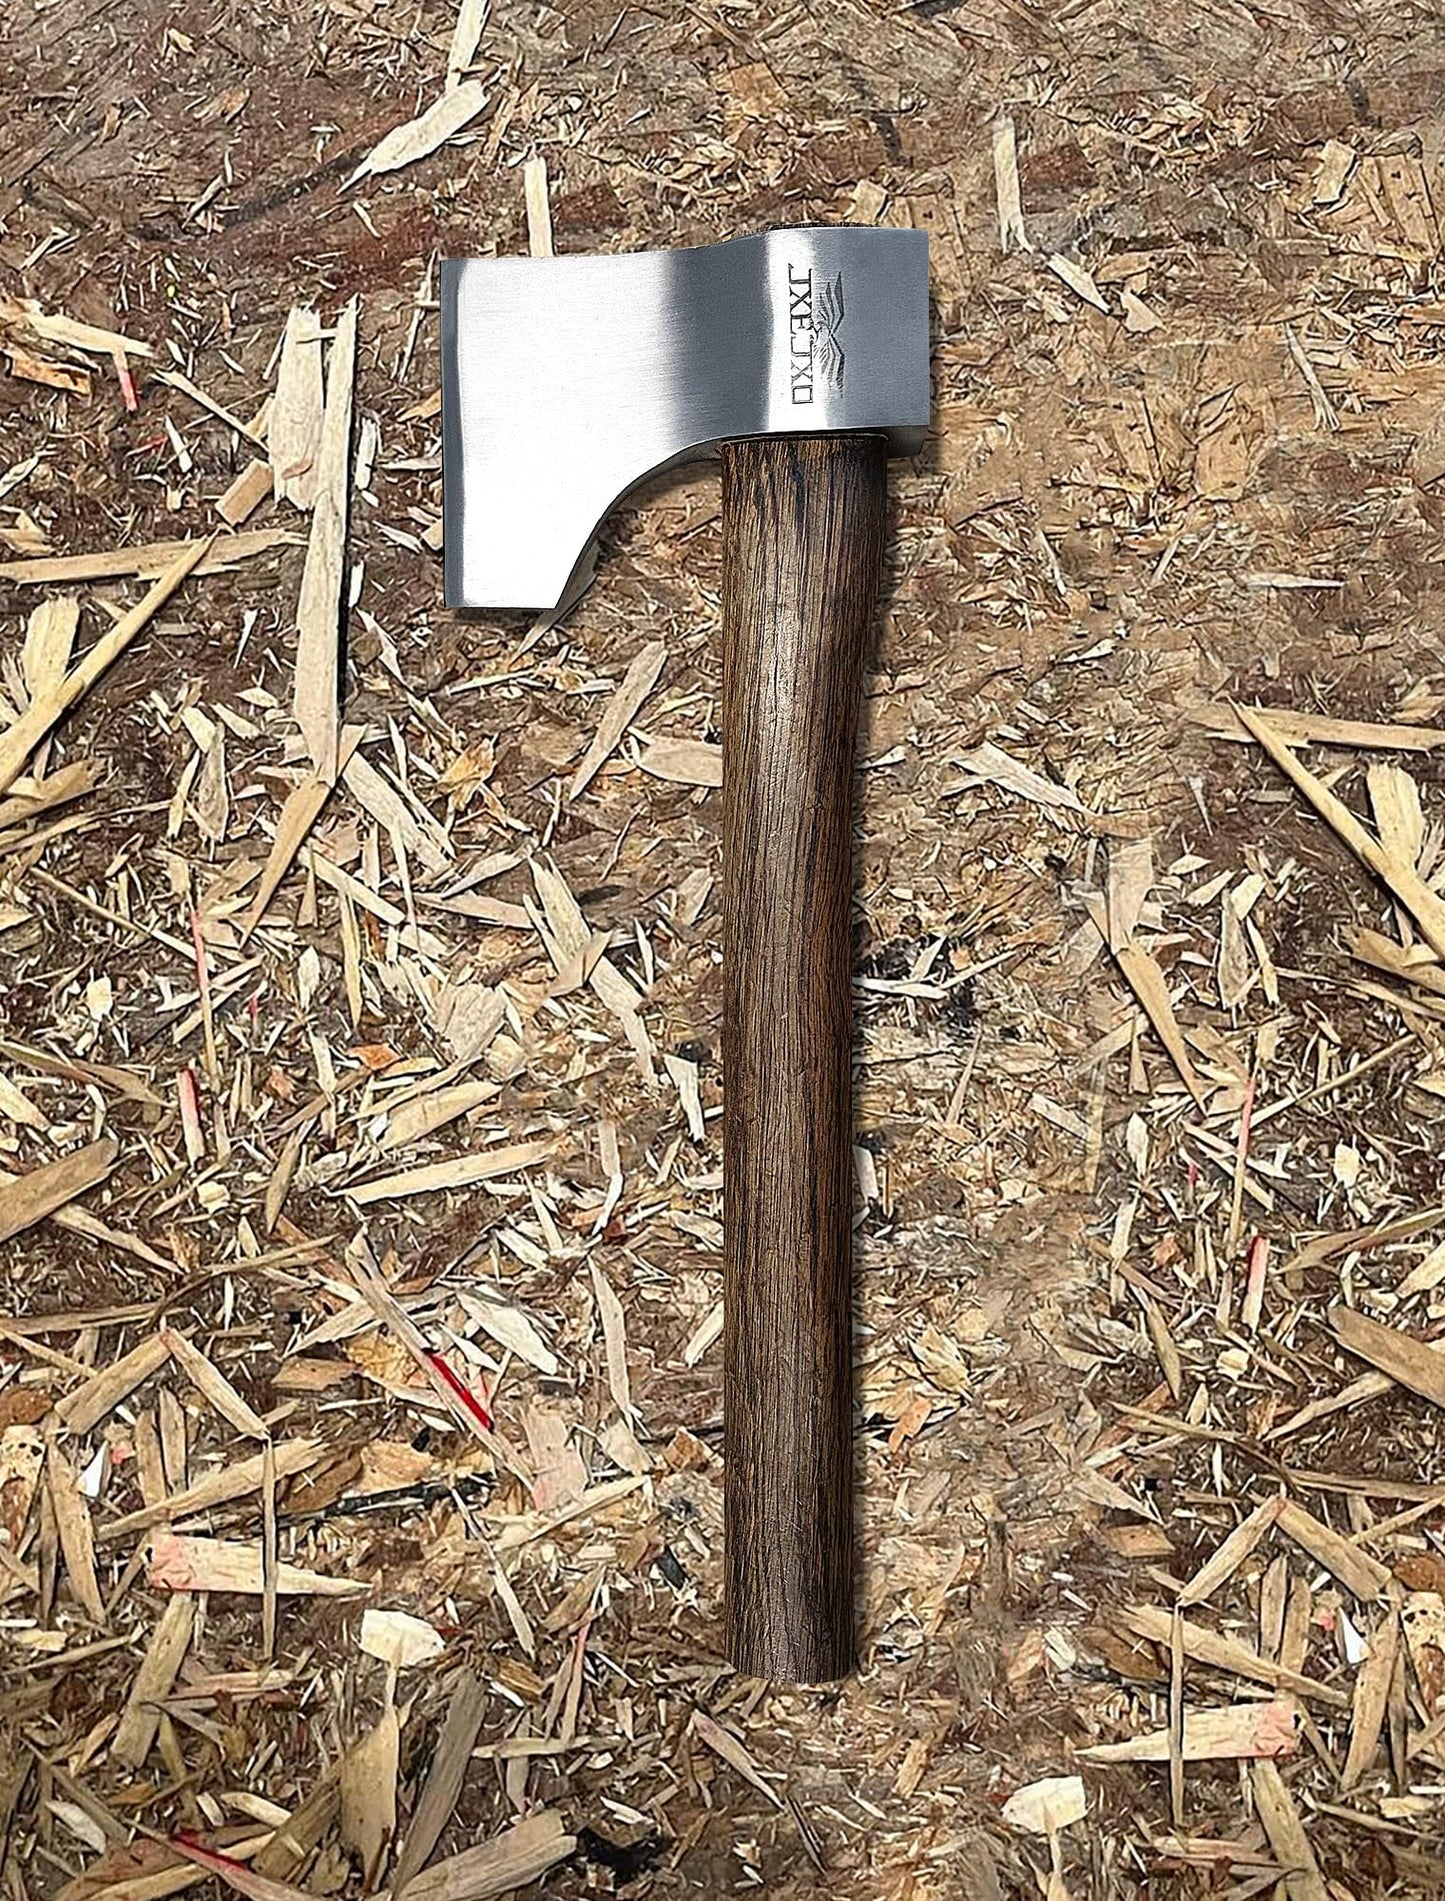 The Woopecker- Professional Throwing Hatchet for Axe Throwing Competitions -1.58Lbs Head with 16.4" Handle - Balanced and Maneuverable